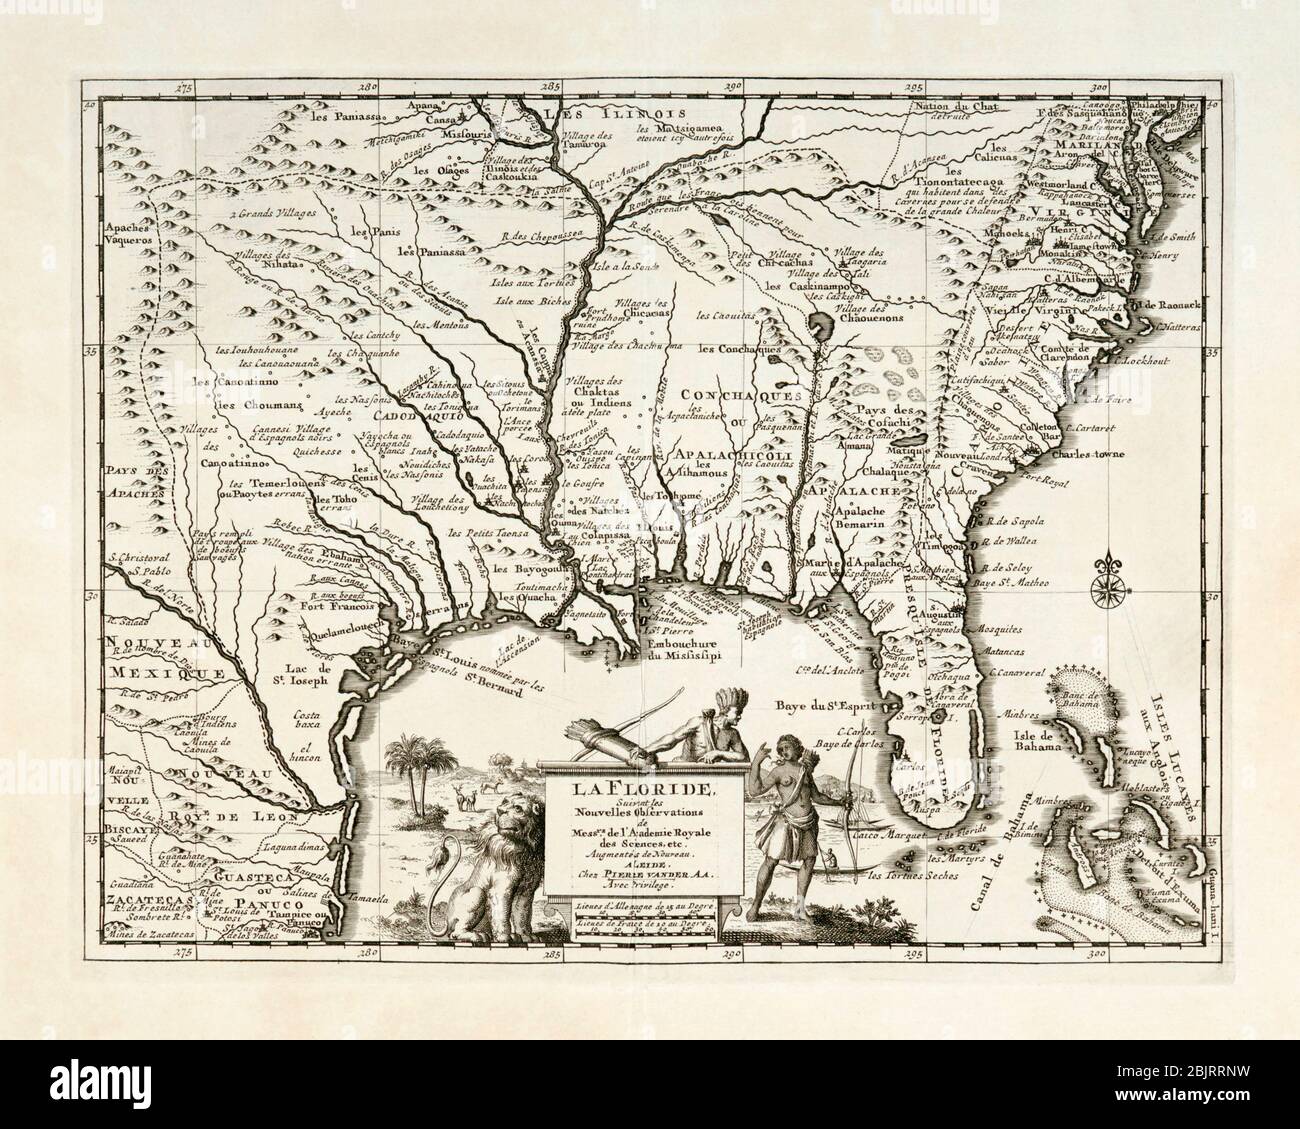 La Floride.  Map of south-east North America, including Florida, showing Native American villages and French, Spanish and English settlements.  Published by Pieter van der Aa, Leiden, circa 1713. Stock Photo